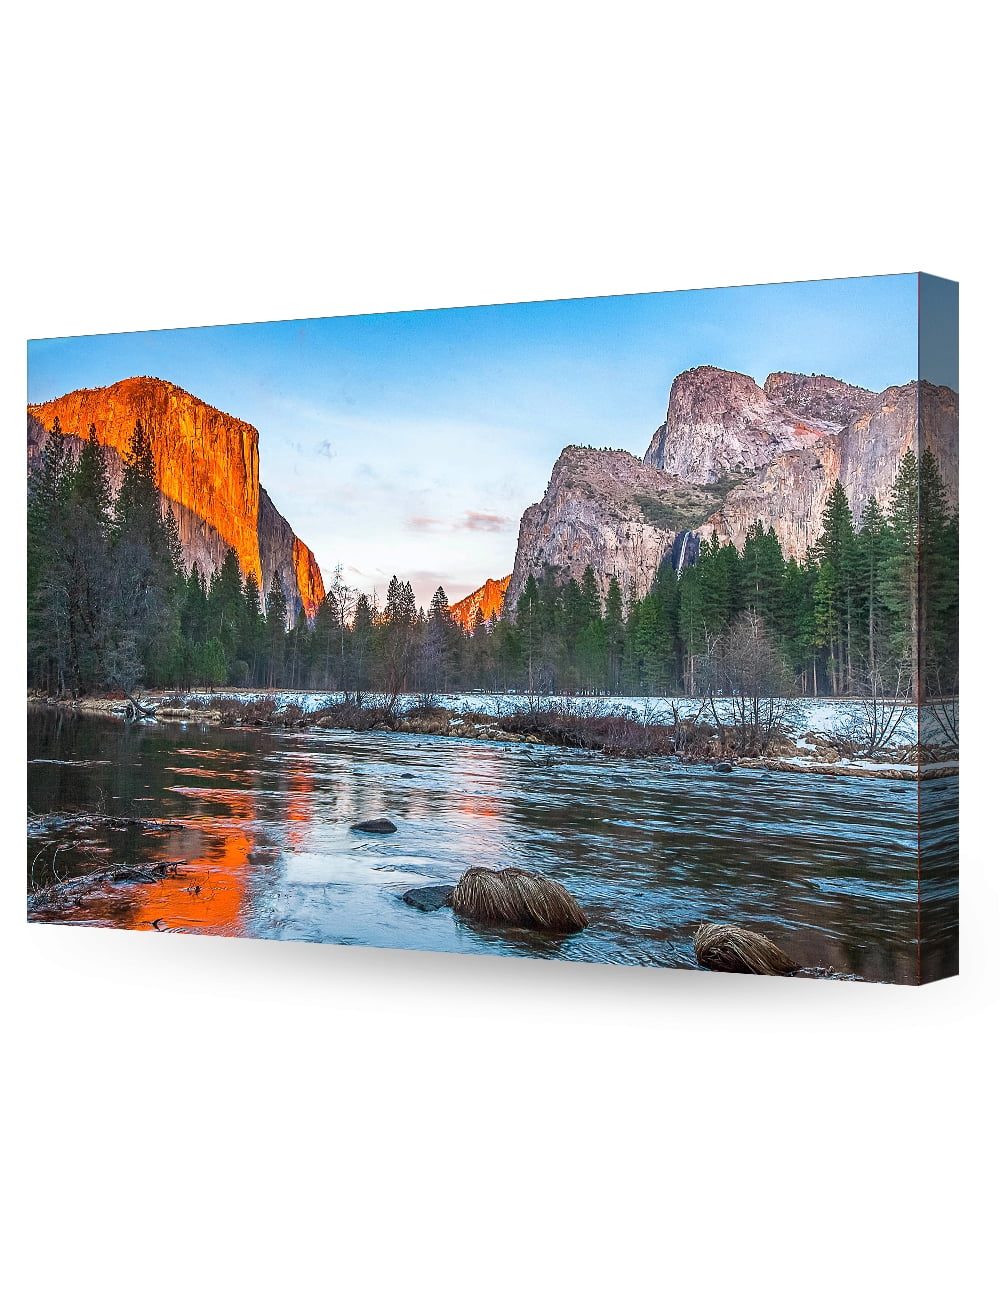 DecorArts View of El Capitan at Sunset, Yosemite National Park. Giclee  Canvas Prints for Wall Decor. 30x20